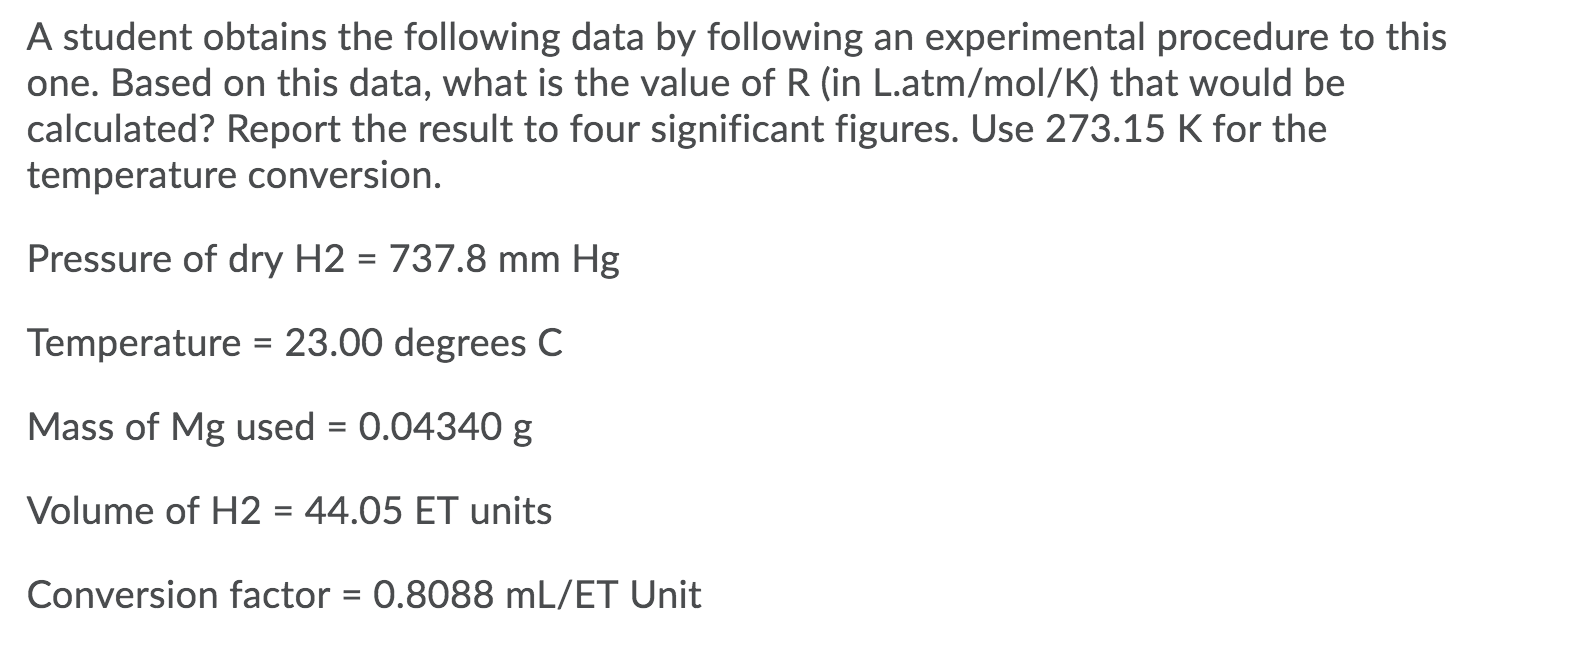 A student obtains the following data by following an experimental procedure to this
one. Based on this data, what is the value of R (in L.atm/mol/K) that would be
calculated? Report the result to four significant figures. Use 273.15 K for the
temperature conversion.
Pressure of dry H2 = 737.8 mm Hg
Temperature = 23.00 degrees C
Mass of Mg used = 0.04340 g
Volume of H2 = 44.05 ET units
%3D
Conversion factor = 0.8088 mL/ET Unit
